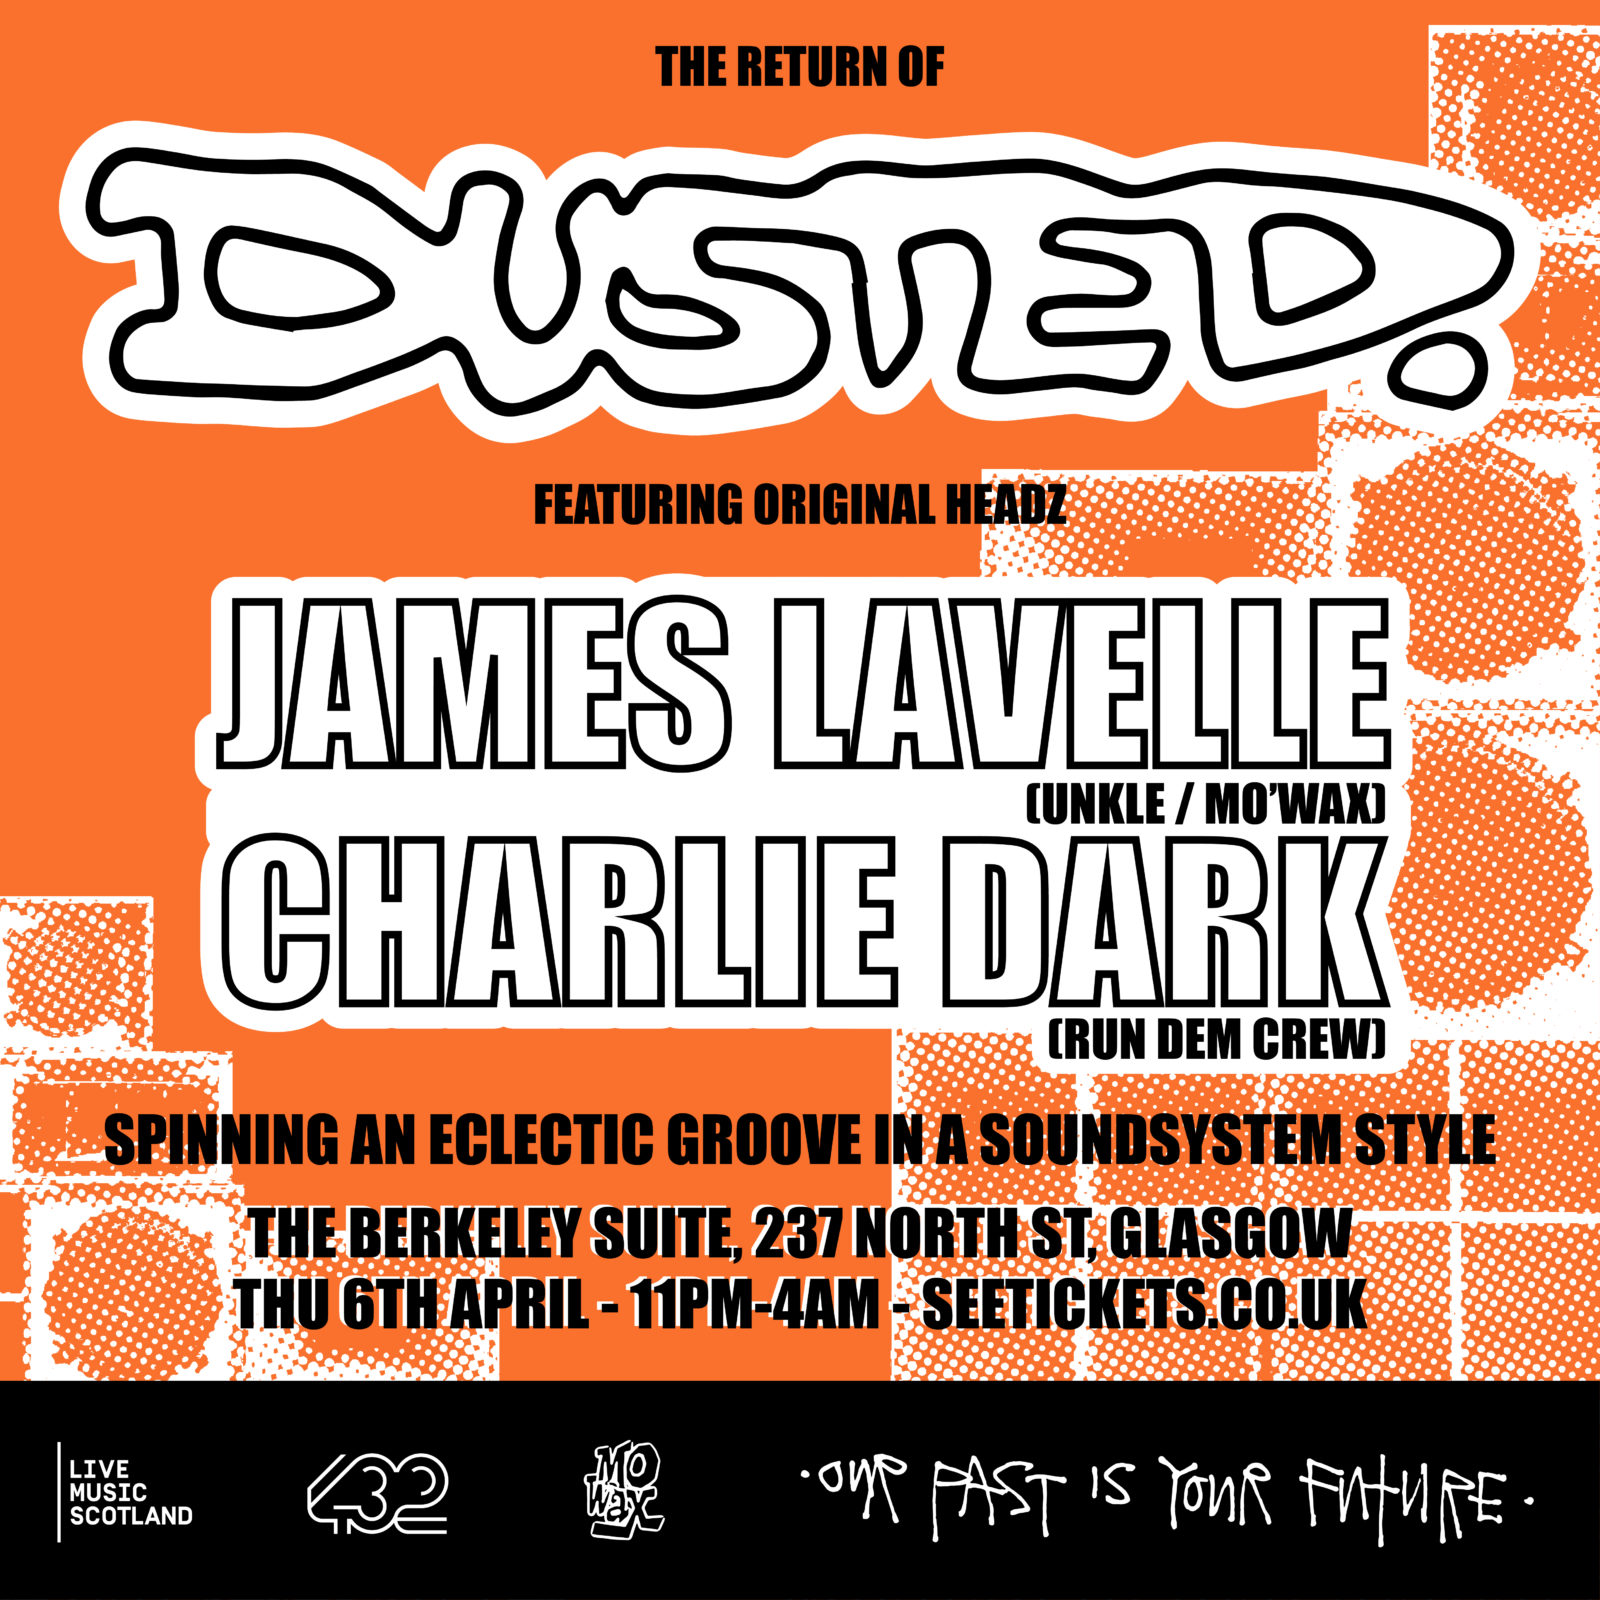 DUSTED feat James Lavelle (UNKLE / Mo Wax) x Charlie Dark